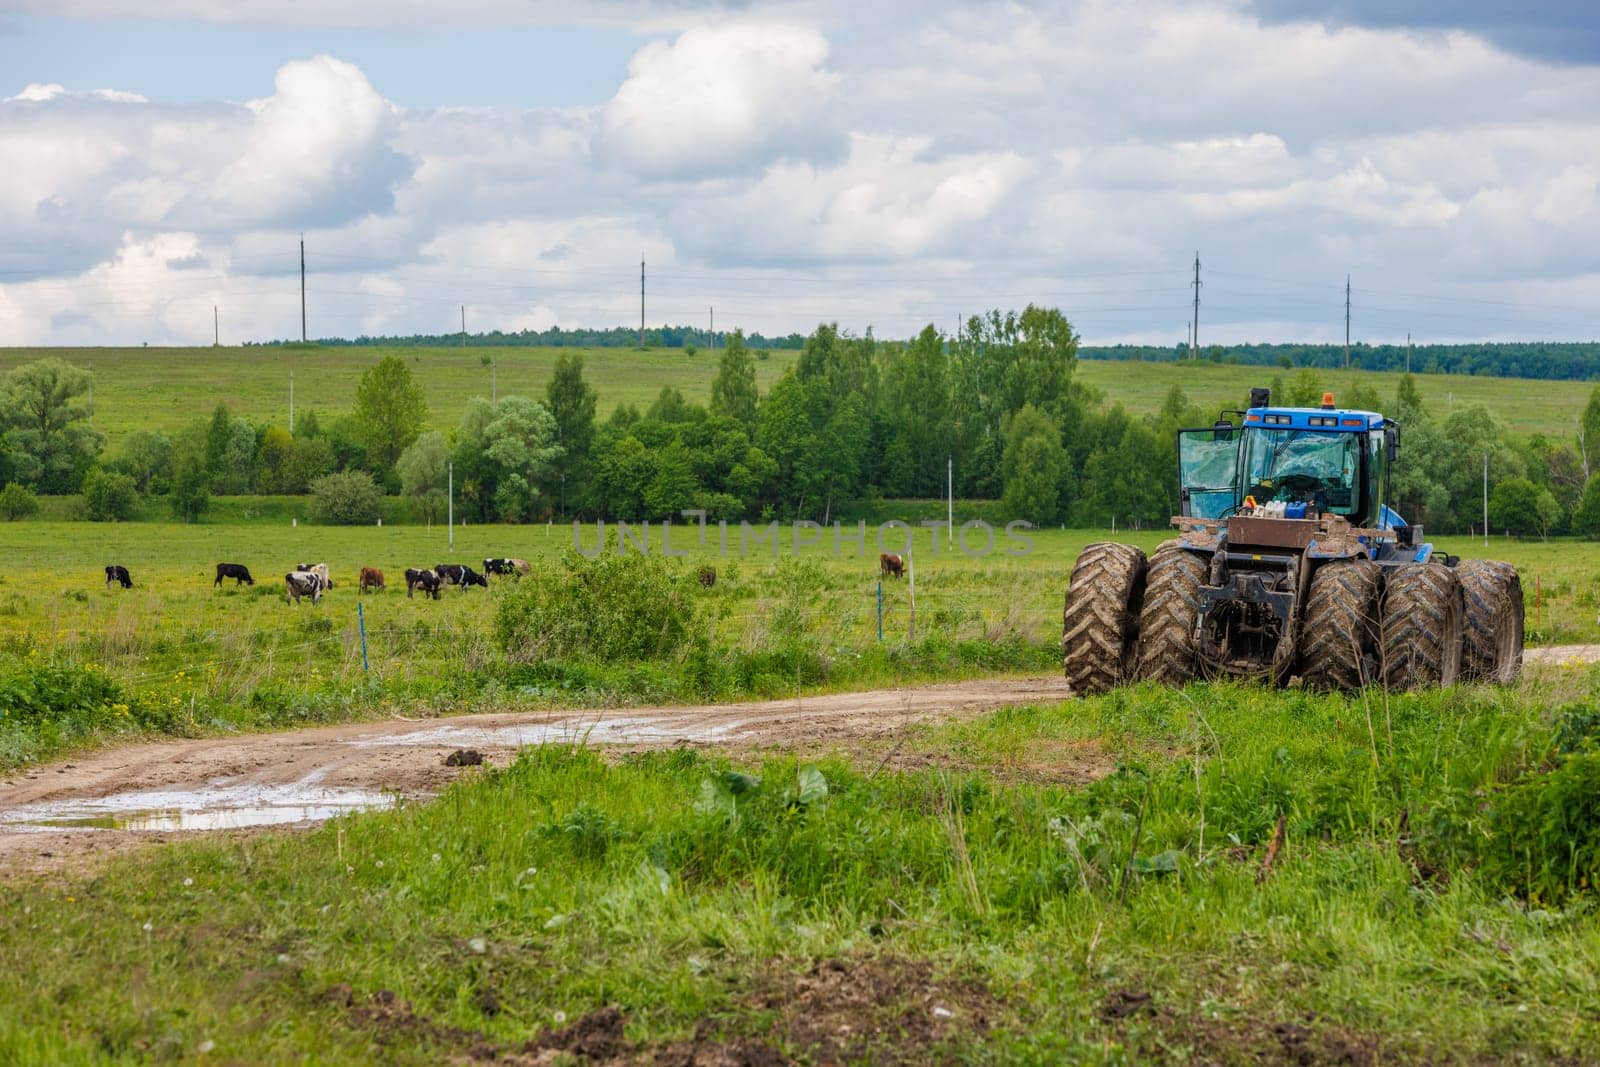 Blue New Holland tractor with double wheels standing near agricultural field at hot sunny day with cows grazing at nearby meadow in Tula, Russia - June 4, 2022